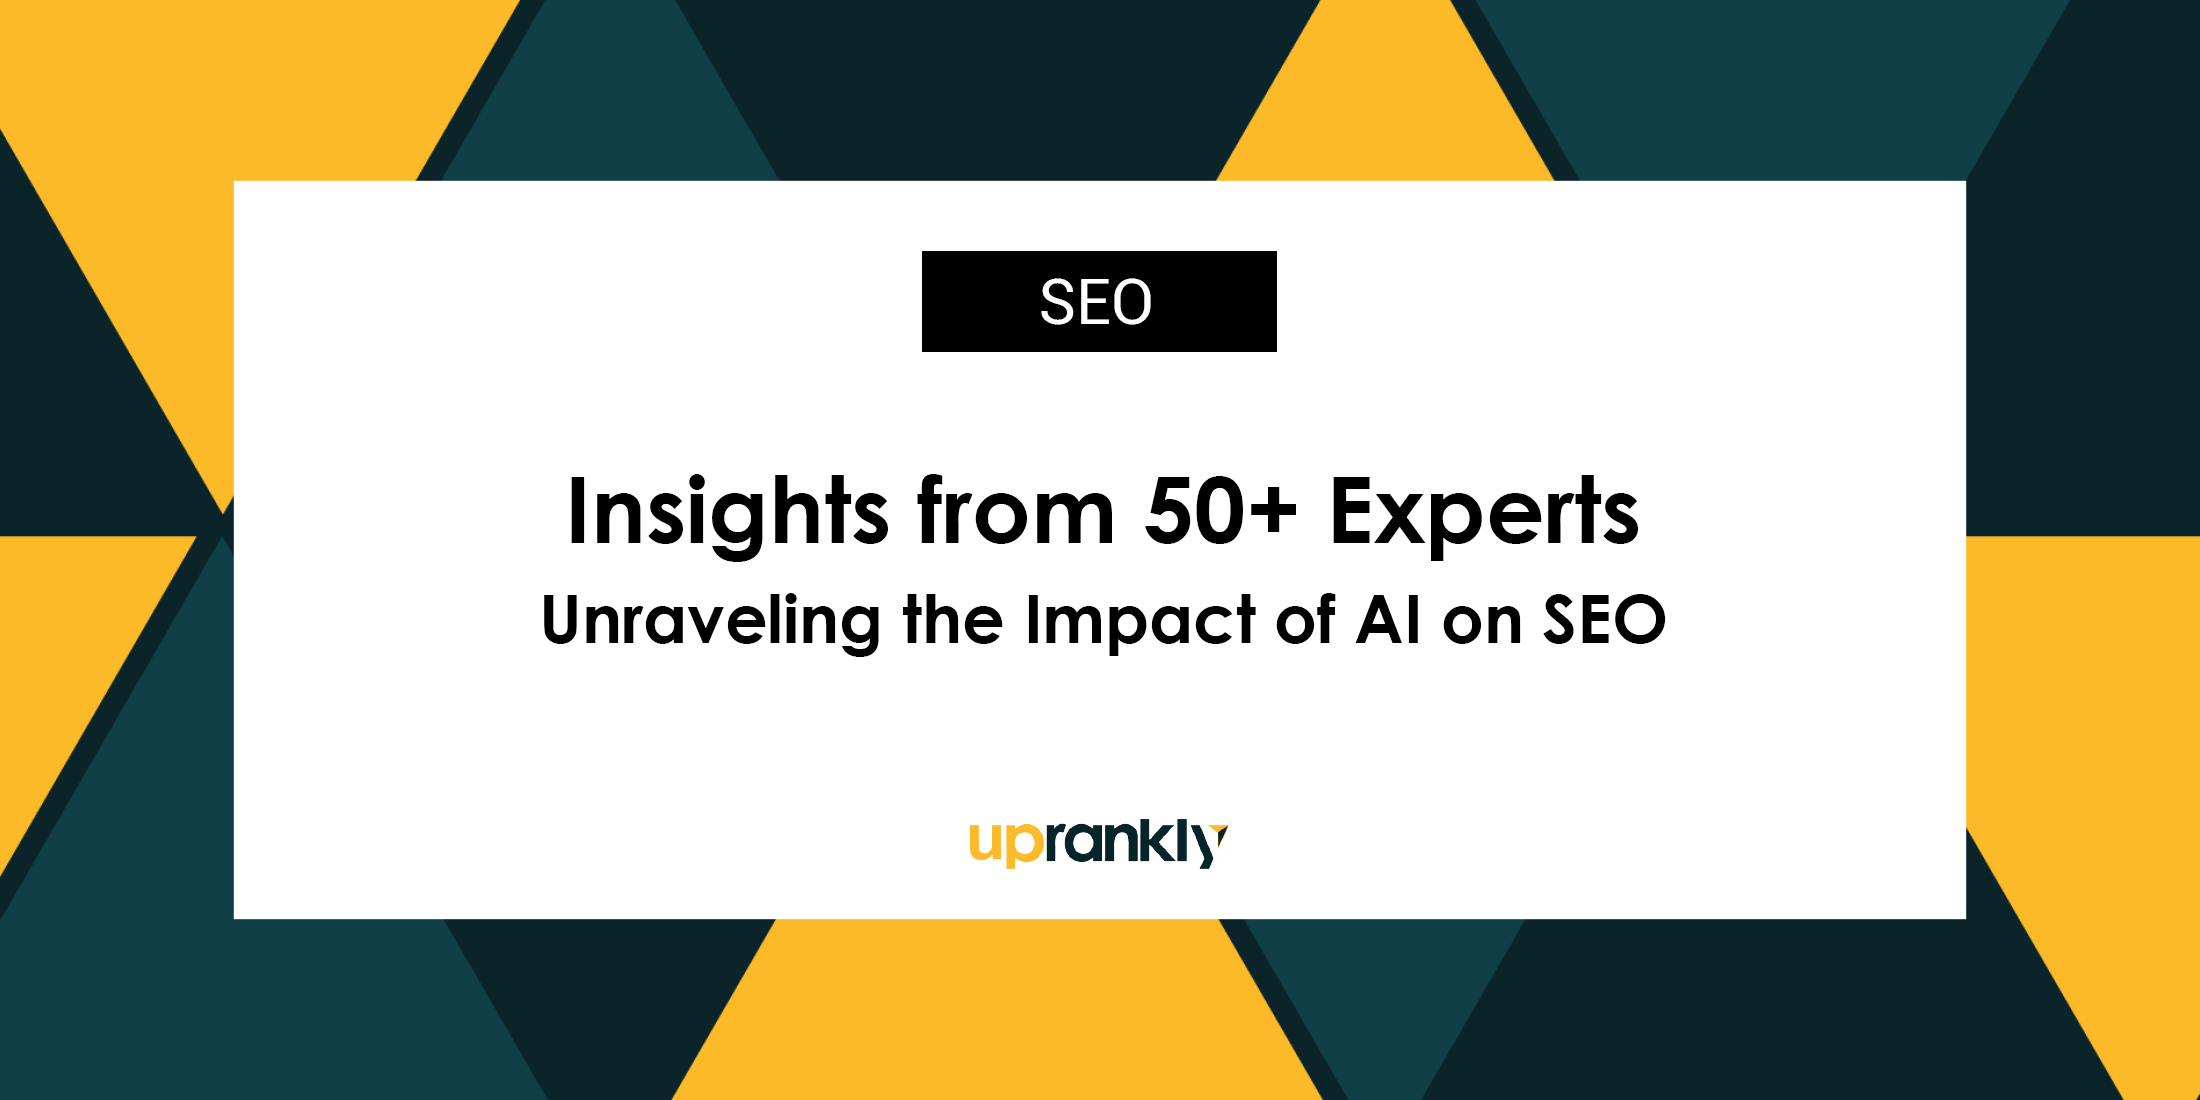 Insights from 50+ Experts: Unraveling the Impact of AI on SEO